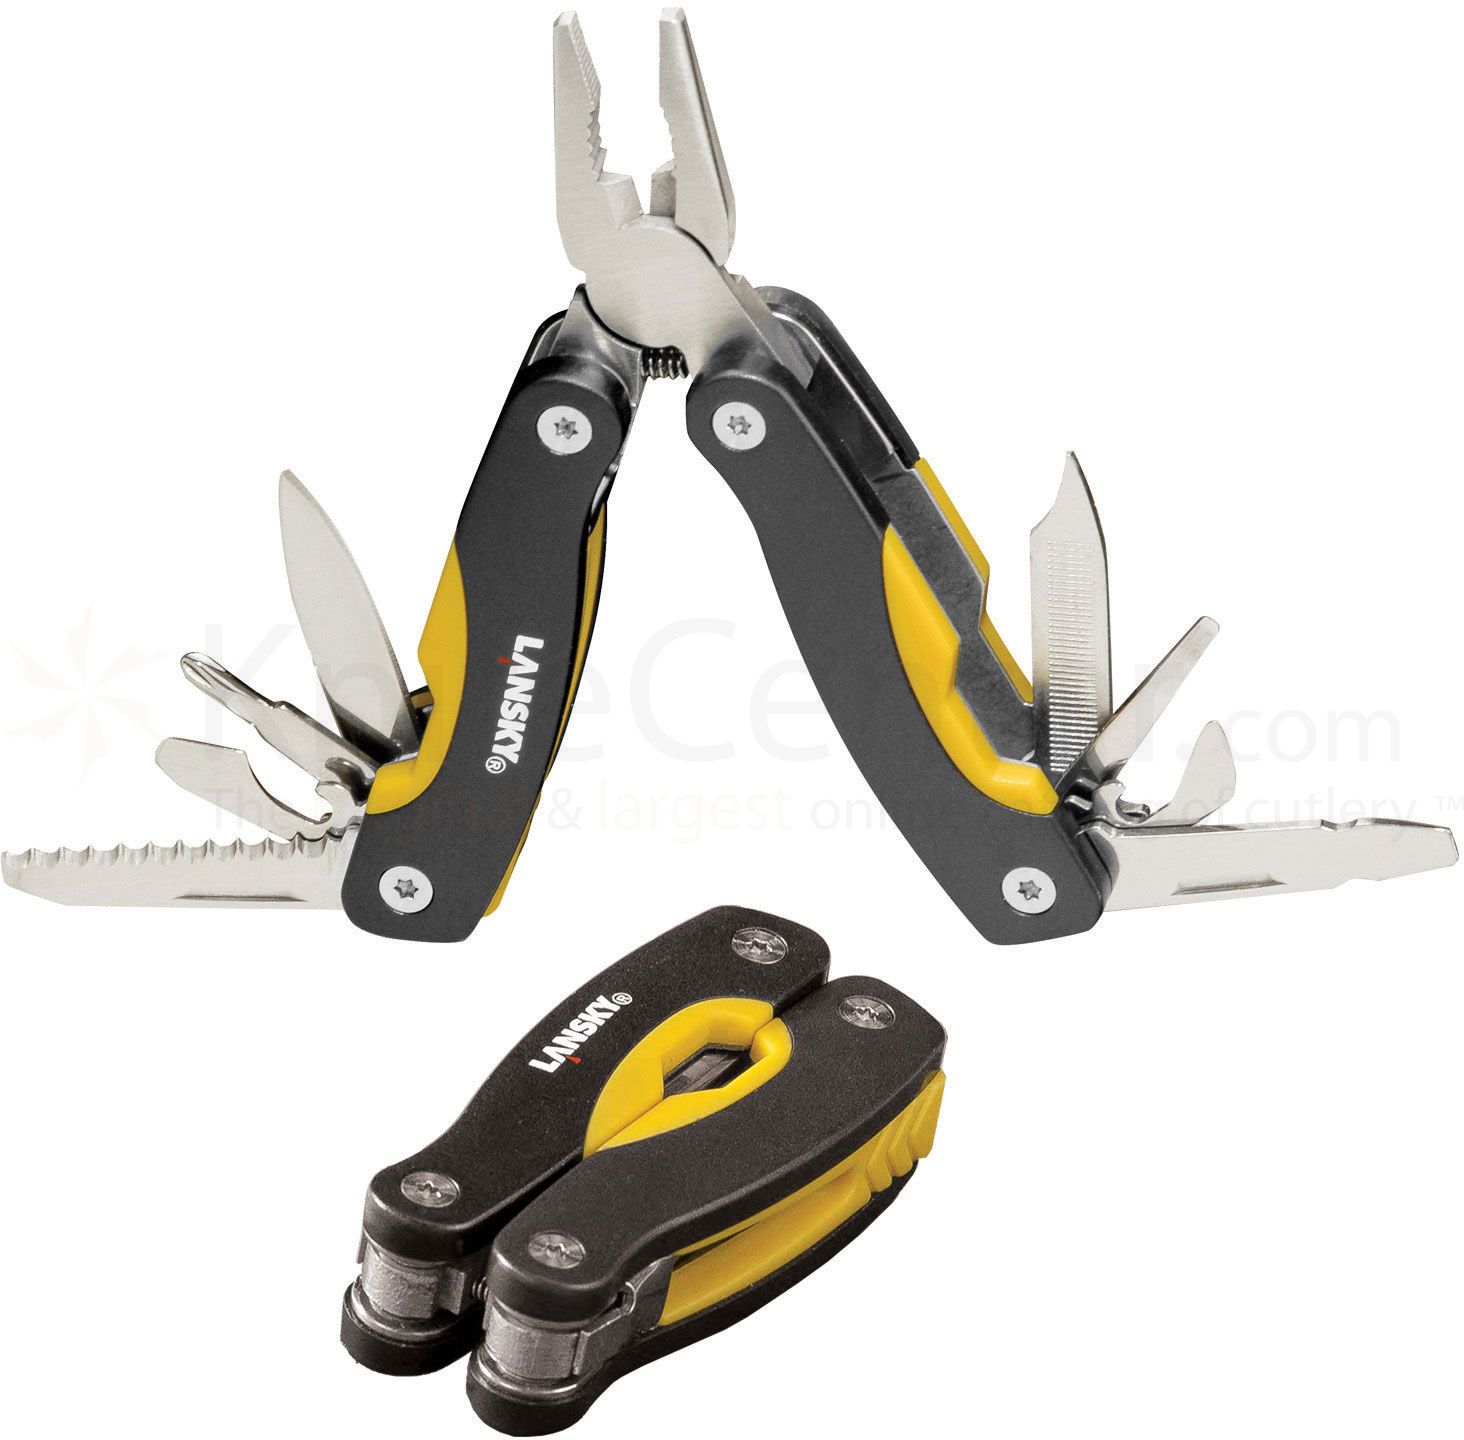 Lansky Mini Multi-Tool, 12 Functions with Plastic Handles and